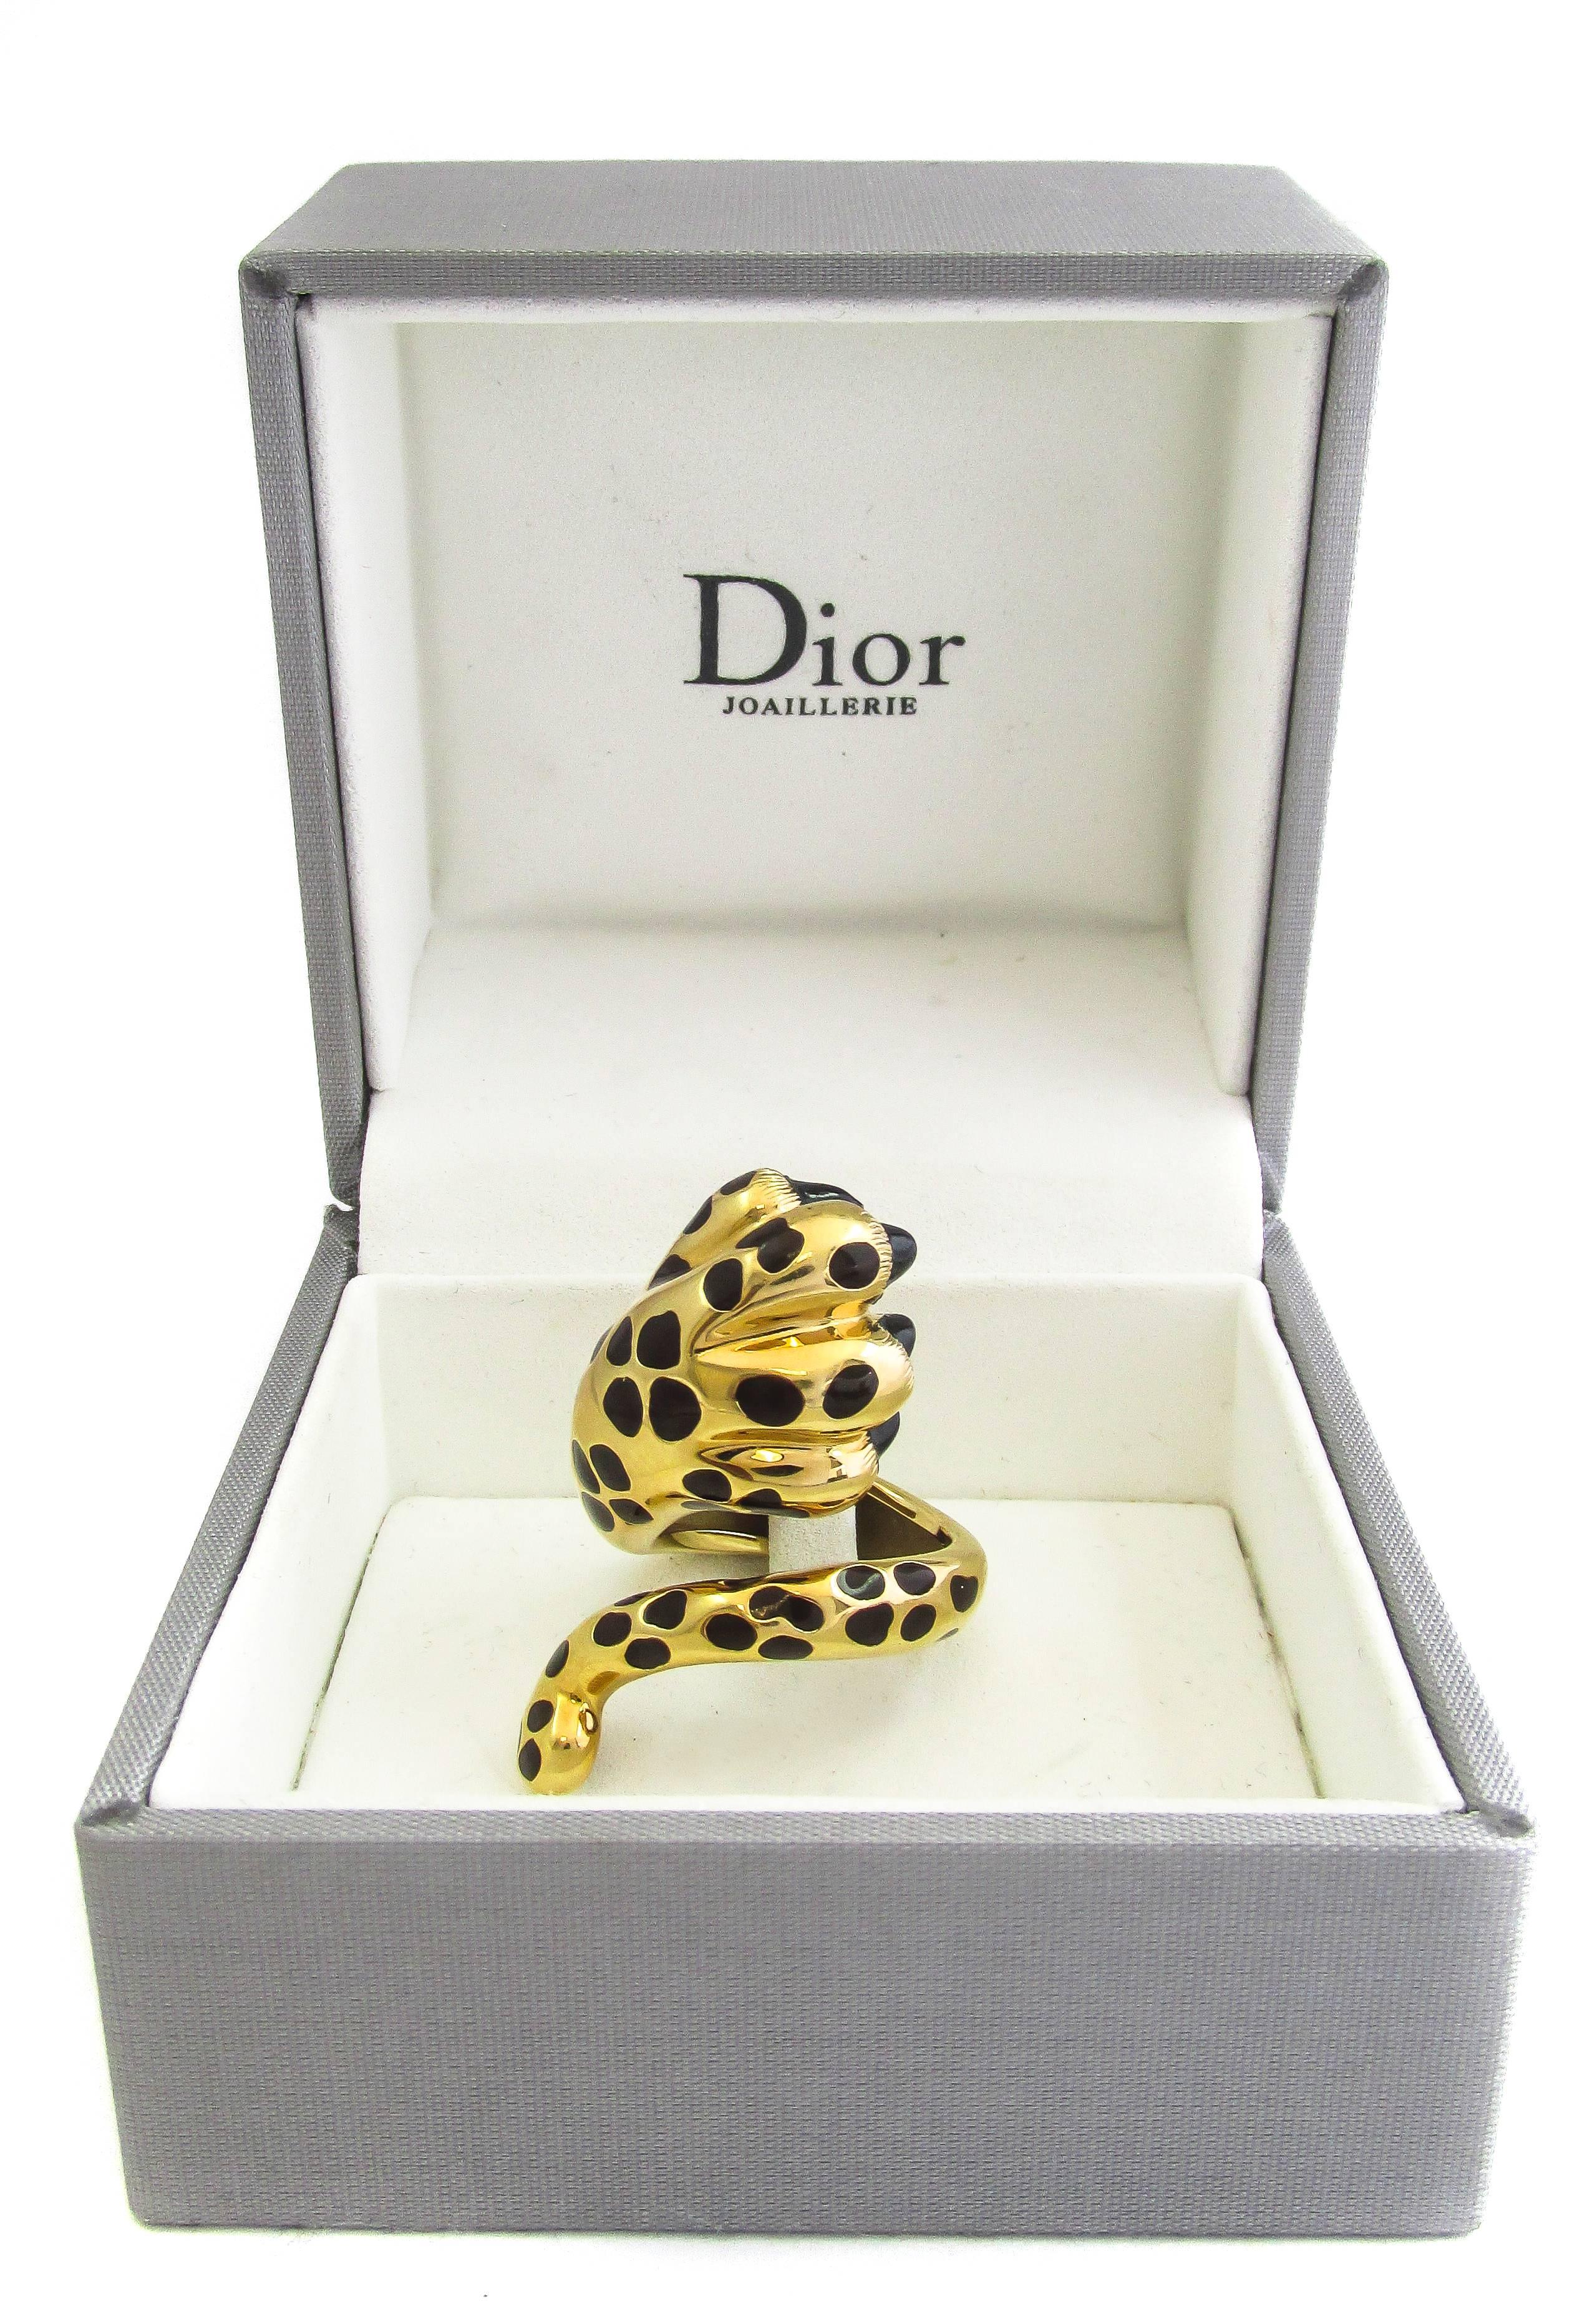 Bold Dior 18 karat yellow gold and black lacquered “Mitza” ring will claw its way into any fashionistas heart. This fun and extravagant ring comes in its original box and a certificate of authenticity by Dior.

- Size 5.5
- Stamped 51 Dior